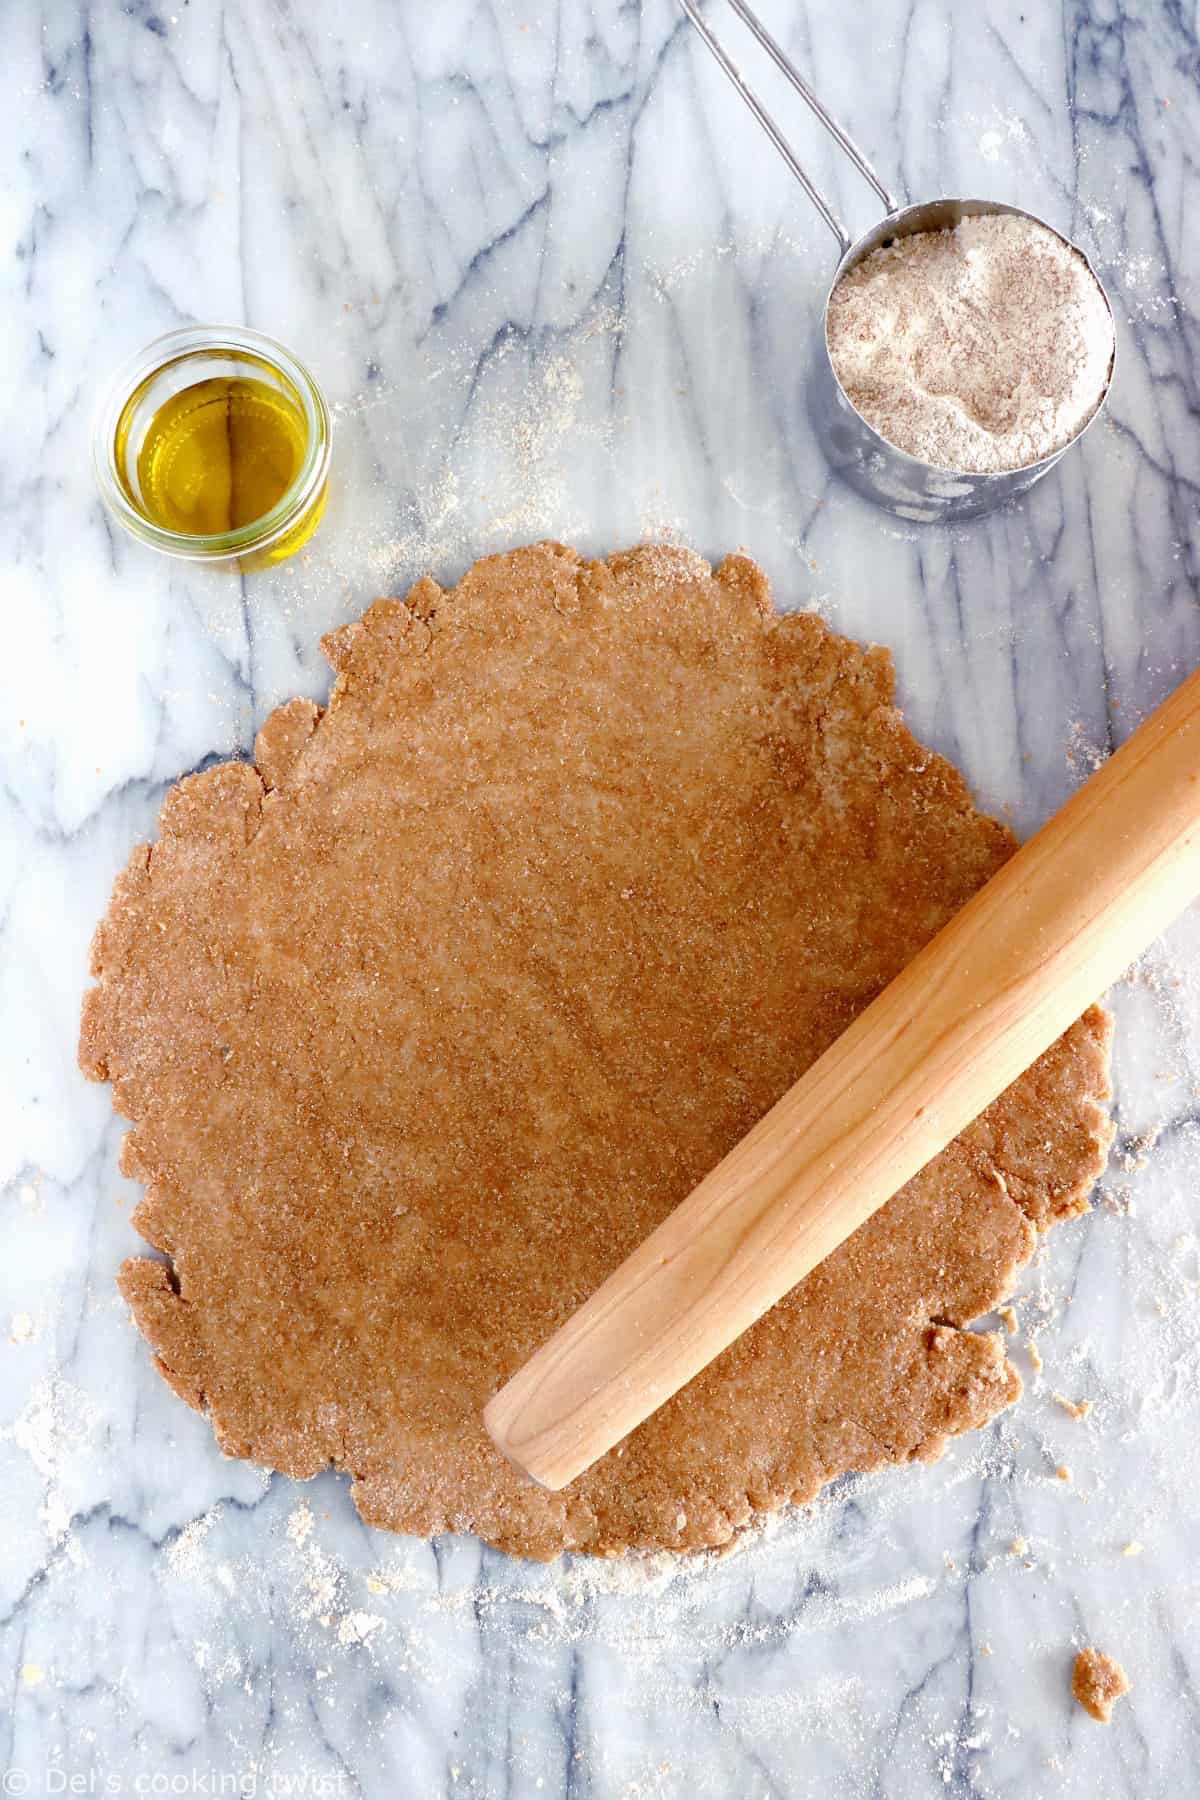 This Olive Oil Whole Wheat Pie Crust is a 100% vegan pie crust and a perfect alternative to a classic butter pie crust.